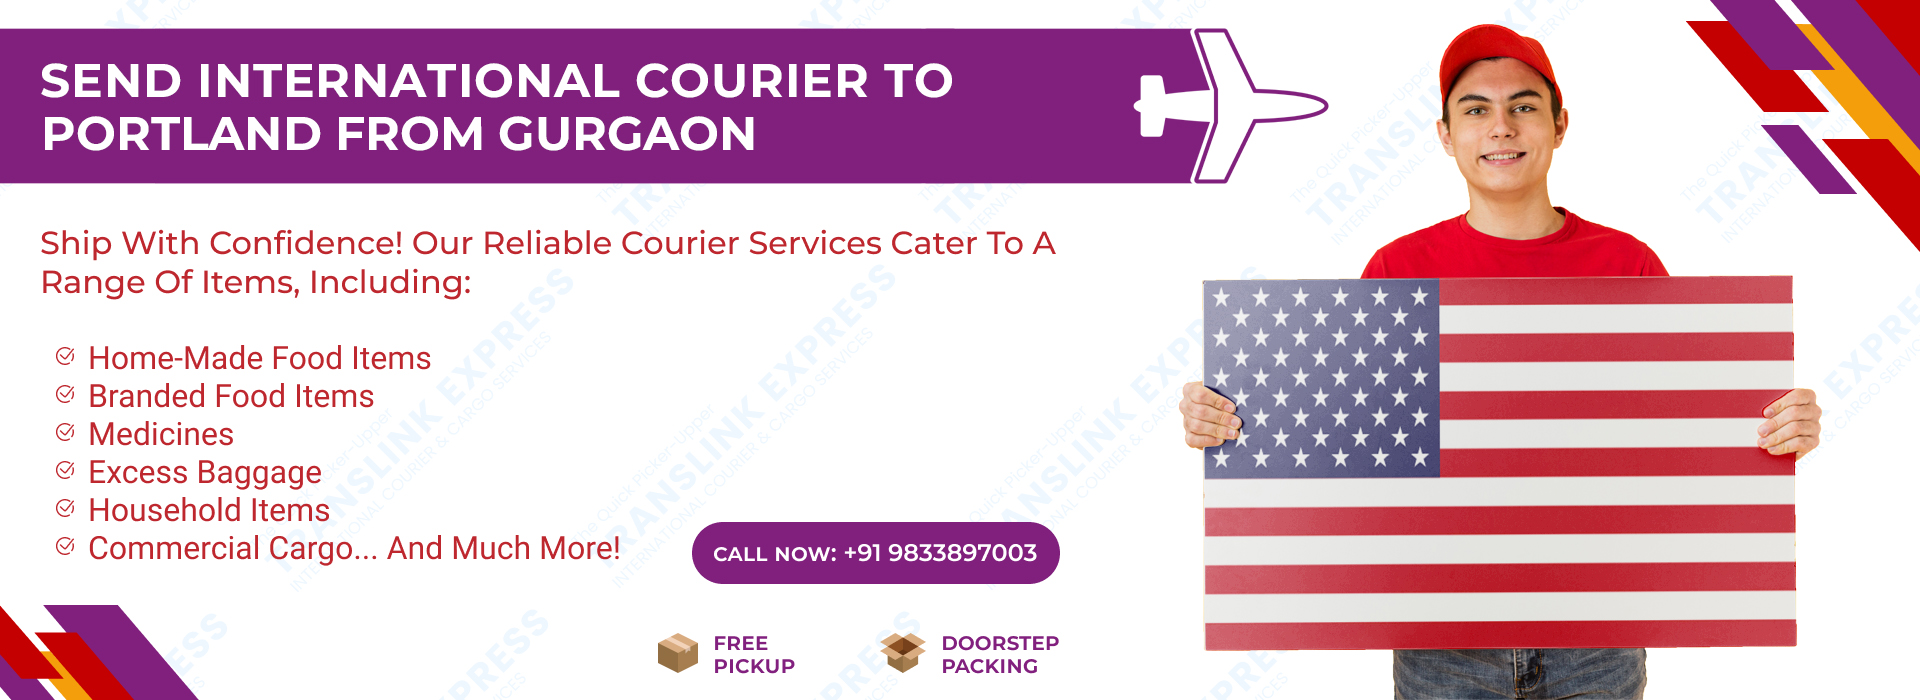 Courier to Portland From Gurgaon